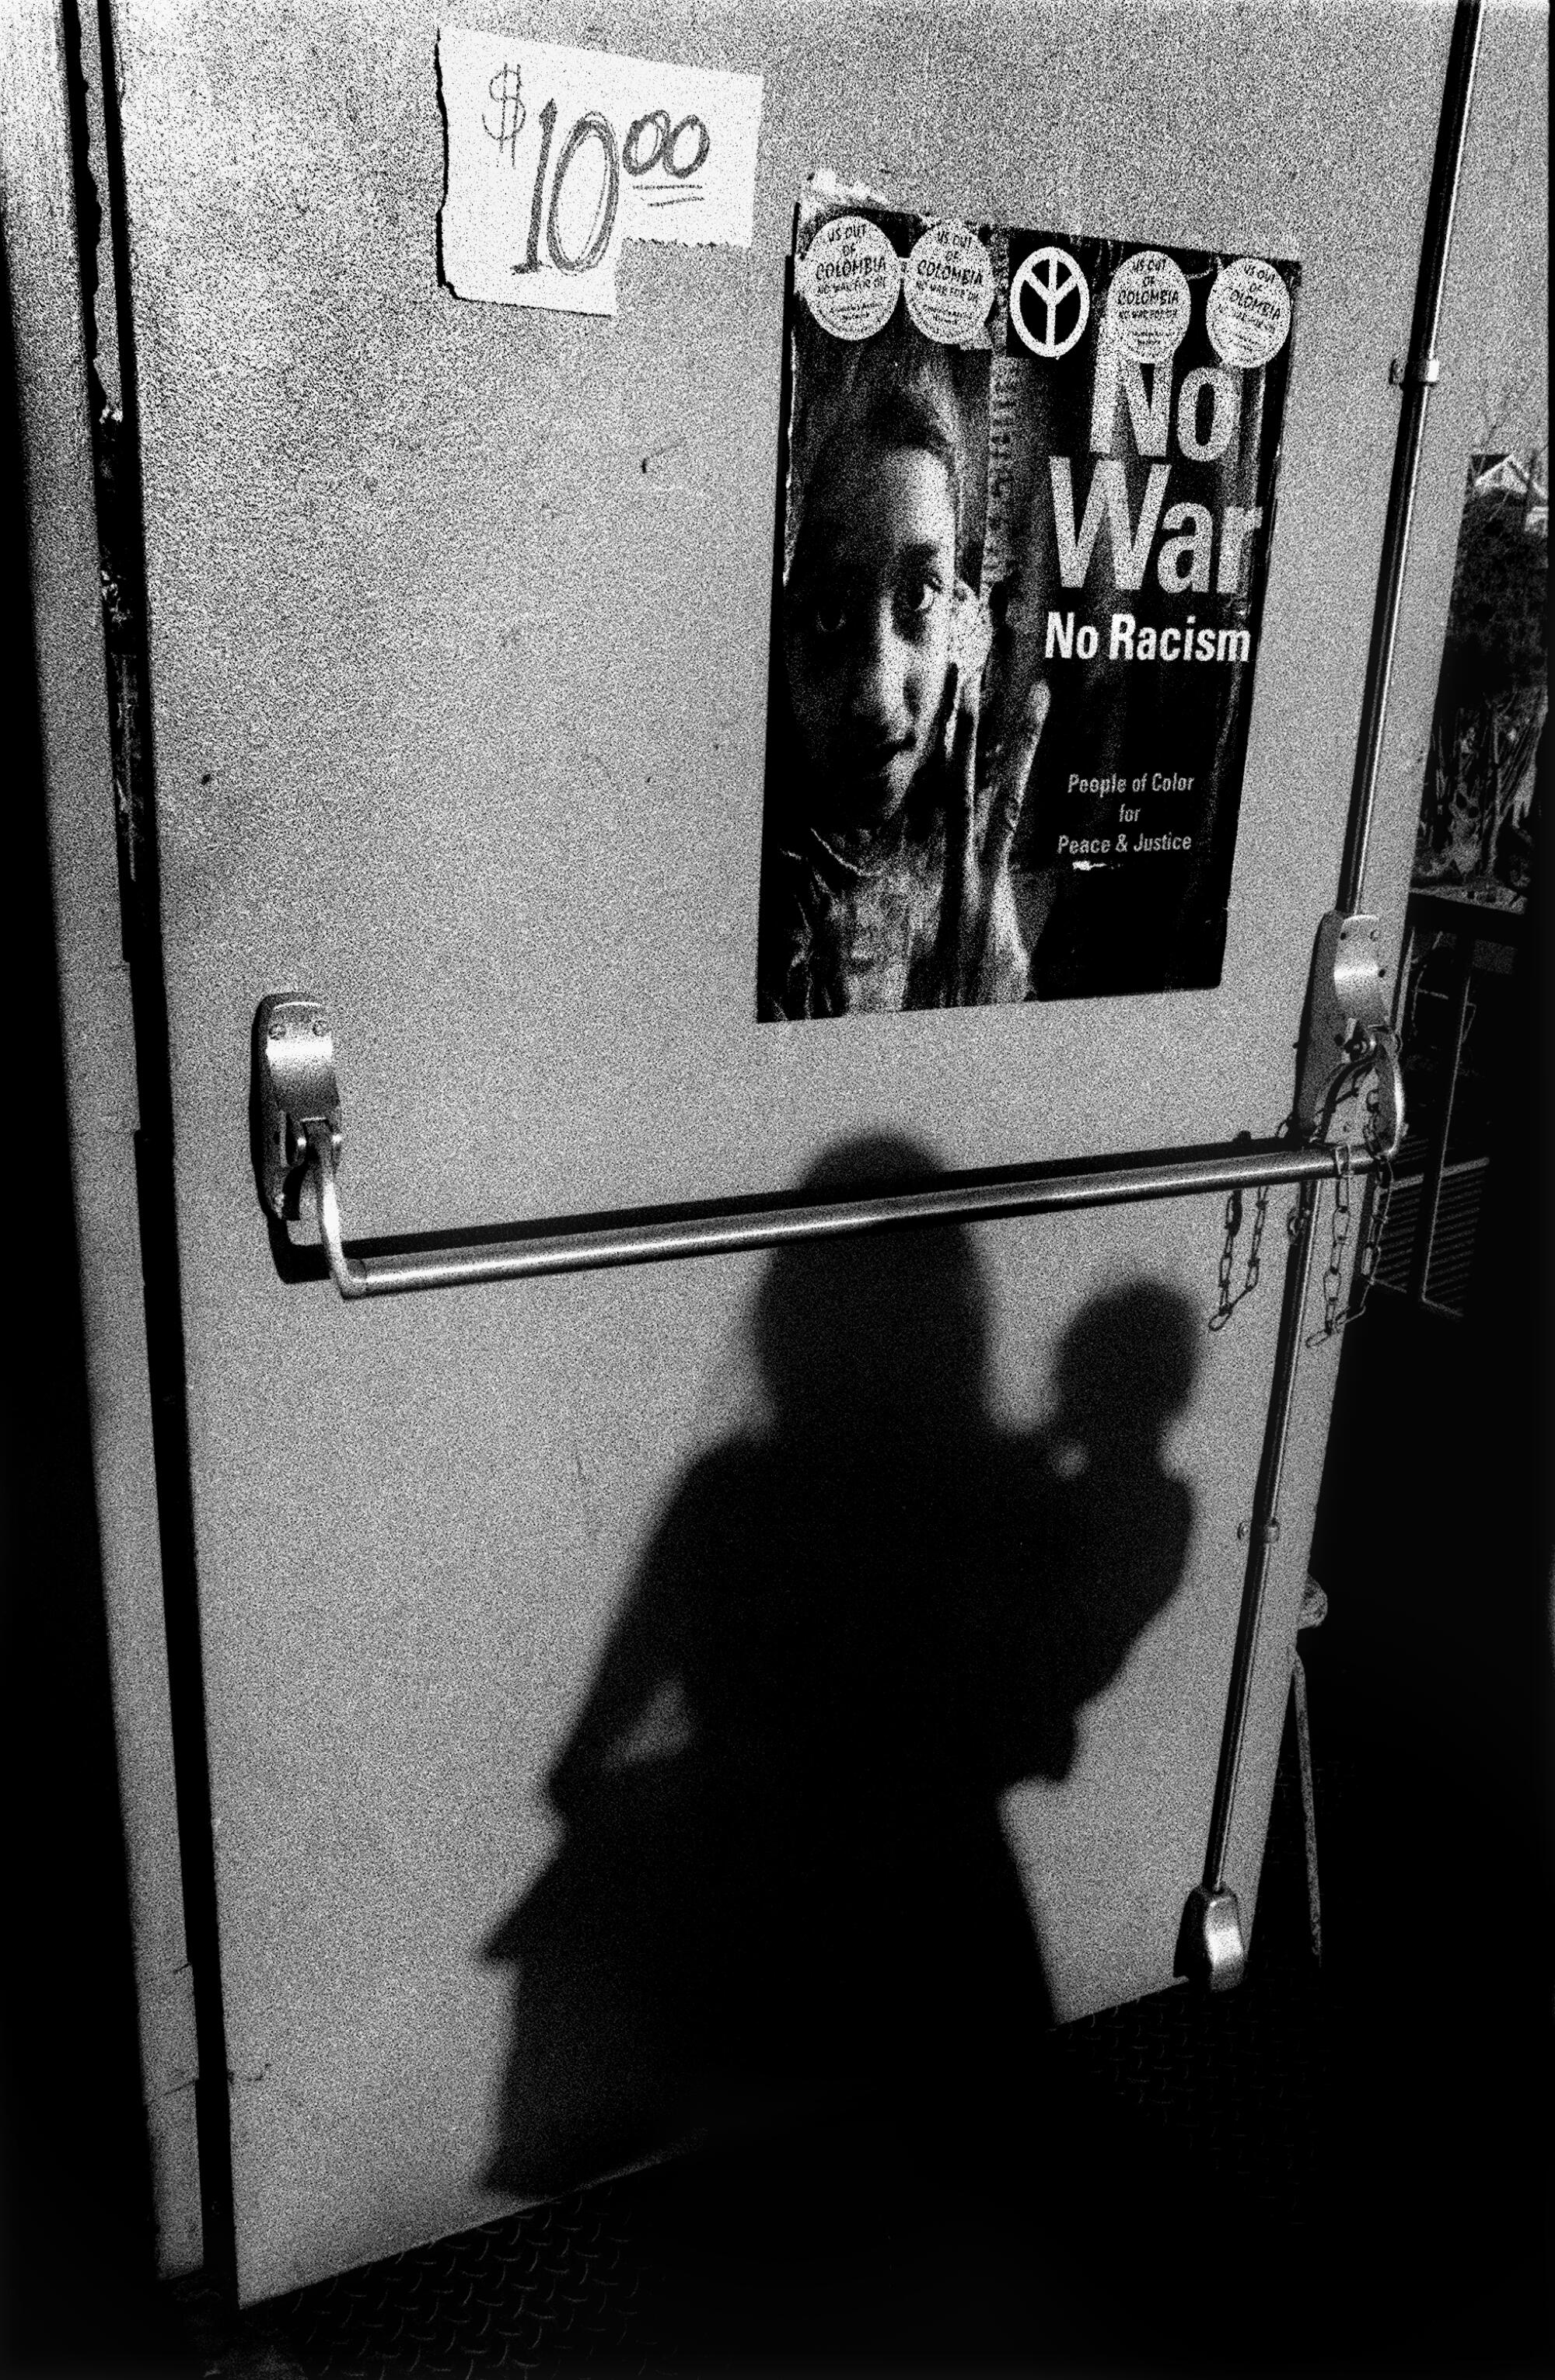 The shadow of a woman carrying a child is seen against a door with a poster that reads "No War, No Racism."